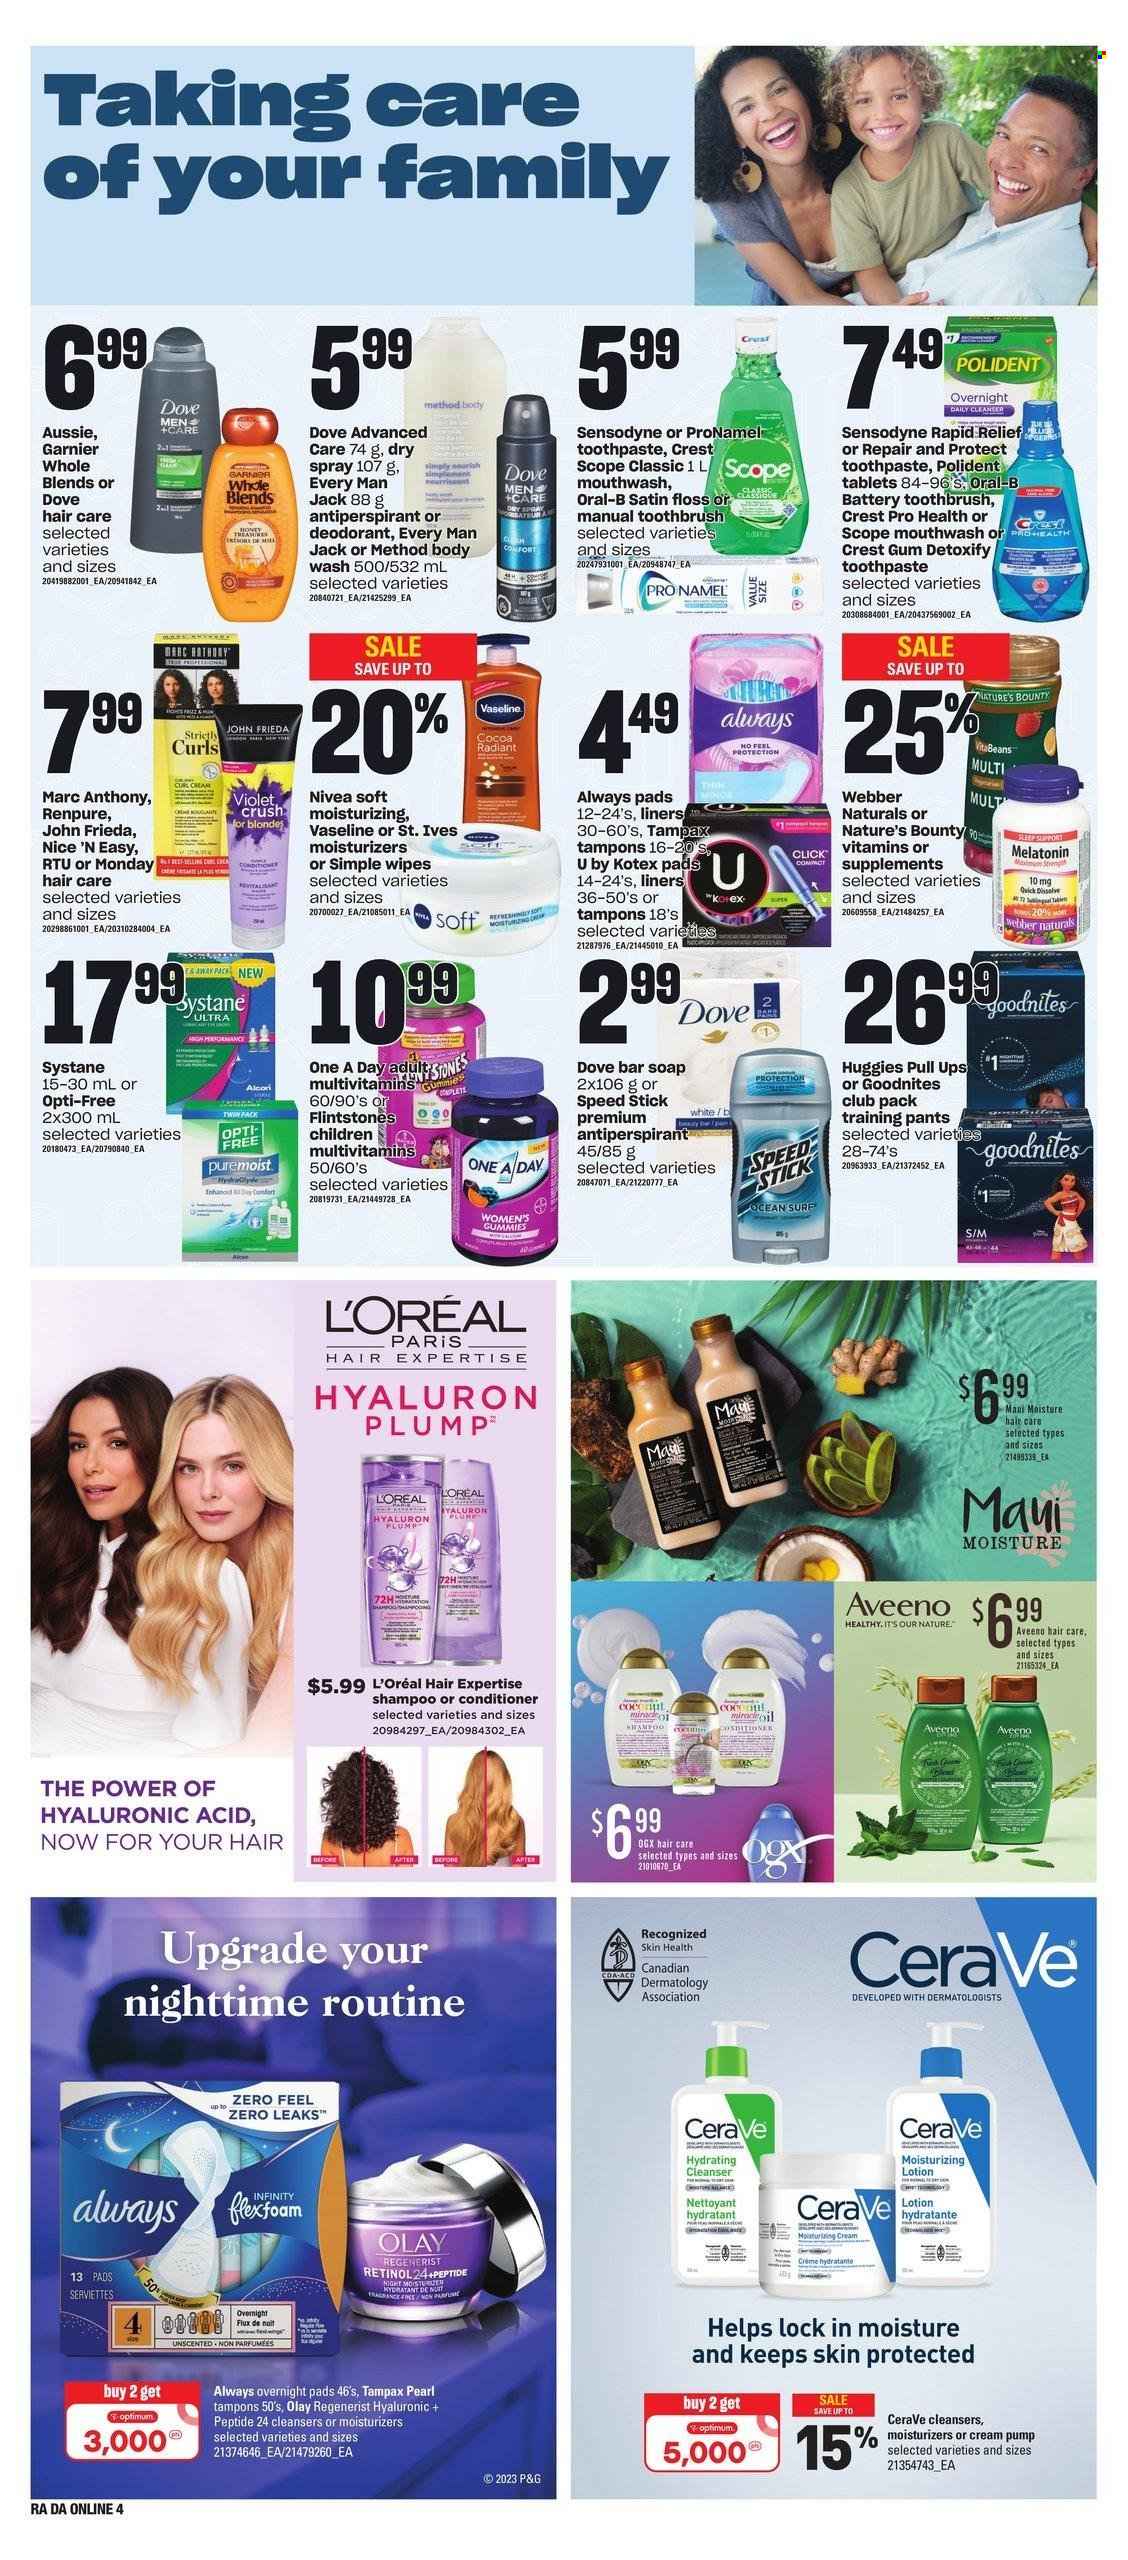 thumbnail - Atlantic Superstore Flyer - March 16, 2023 - March 22, 2023 - Sales products - Dove, wipes, pants, baby pants, Aveeno, Nivea, cleaner, body wash, Vaseline, soap bar, soap, toothbrush, toothpaste, mouthwash, Polident, Crest, Always pads, sanitary pads, Kotex, Kotex pads, tampons, CeraVe, cleanser, L’Oréal, moisturizer, Olay, Infinity, Aussie, conditioner, John Frieda, Maui Moisture, body lotion, anti-perspirant, fragrance, Speed Stick, Optimum, Melatonin, multivitamin, Nature's Bounty, Garnier, shampoo, Systane, Tampax, Huggies, Oral-B, Sensodyne, deodorant. Page 8.